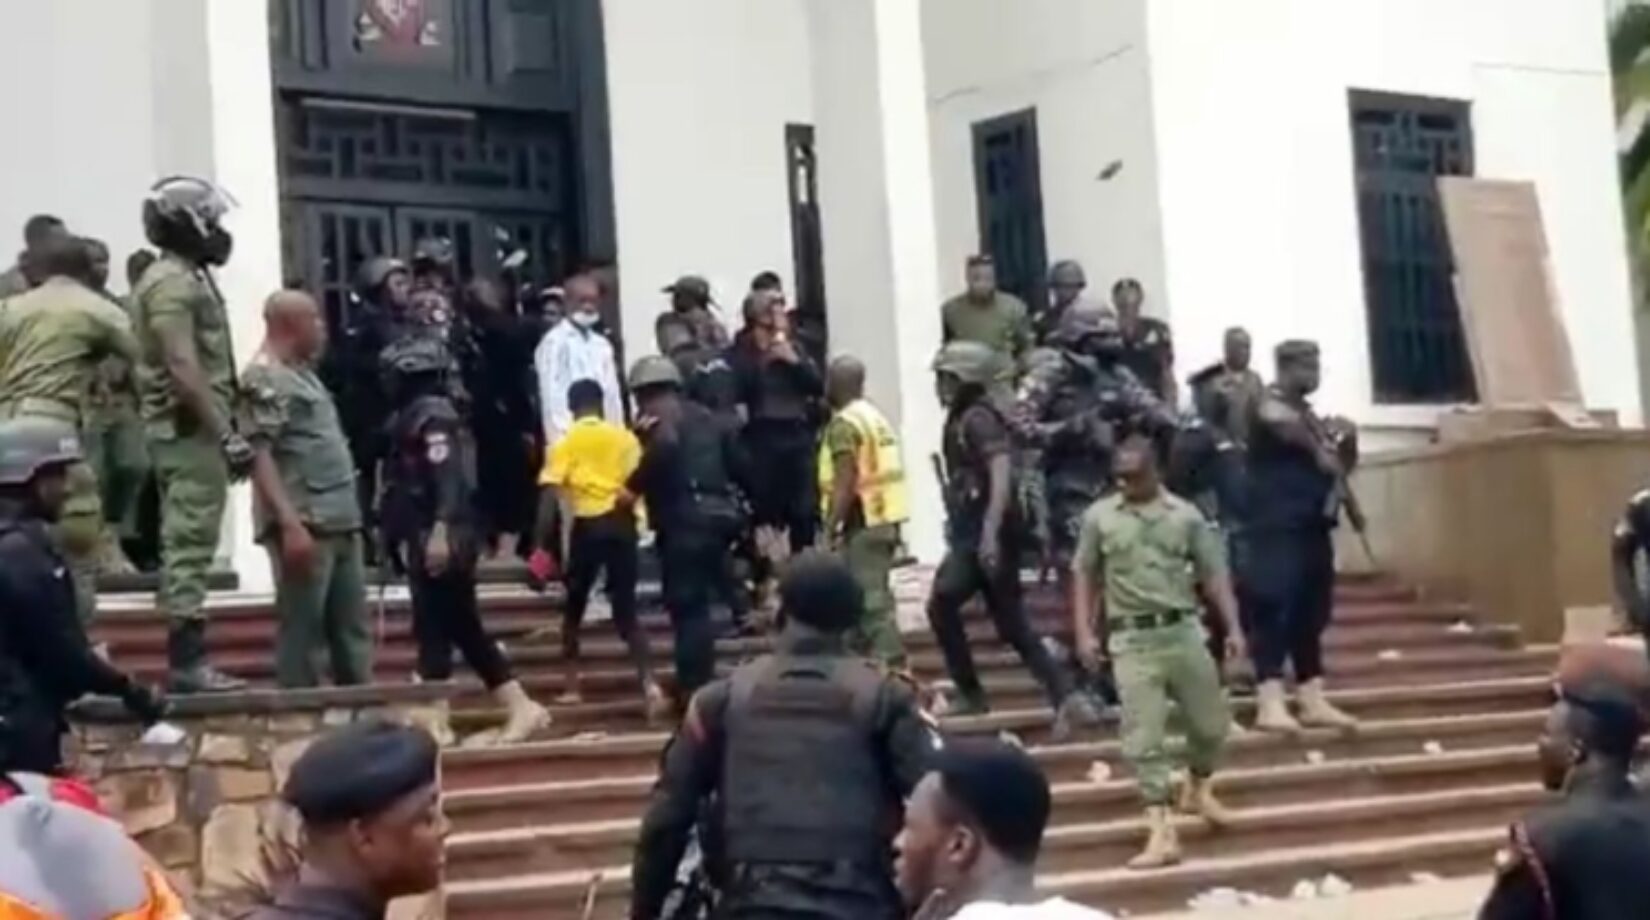 JUST IN:Students clash with police at UG while protesting management’s ‘silence’ on accommodation crisis